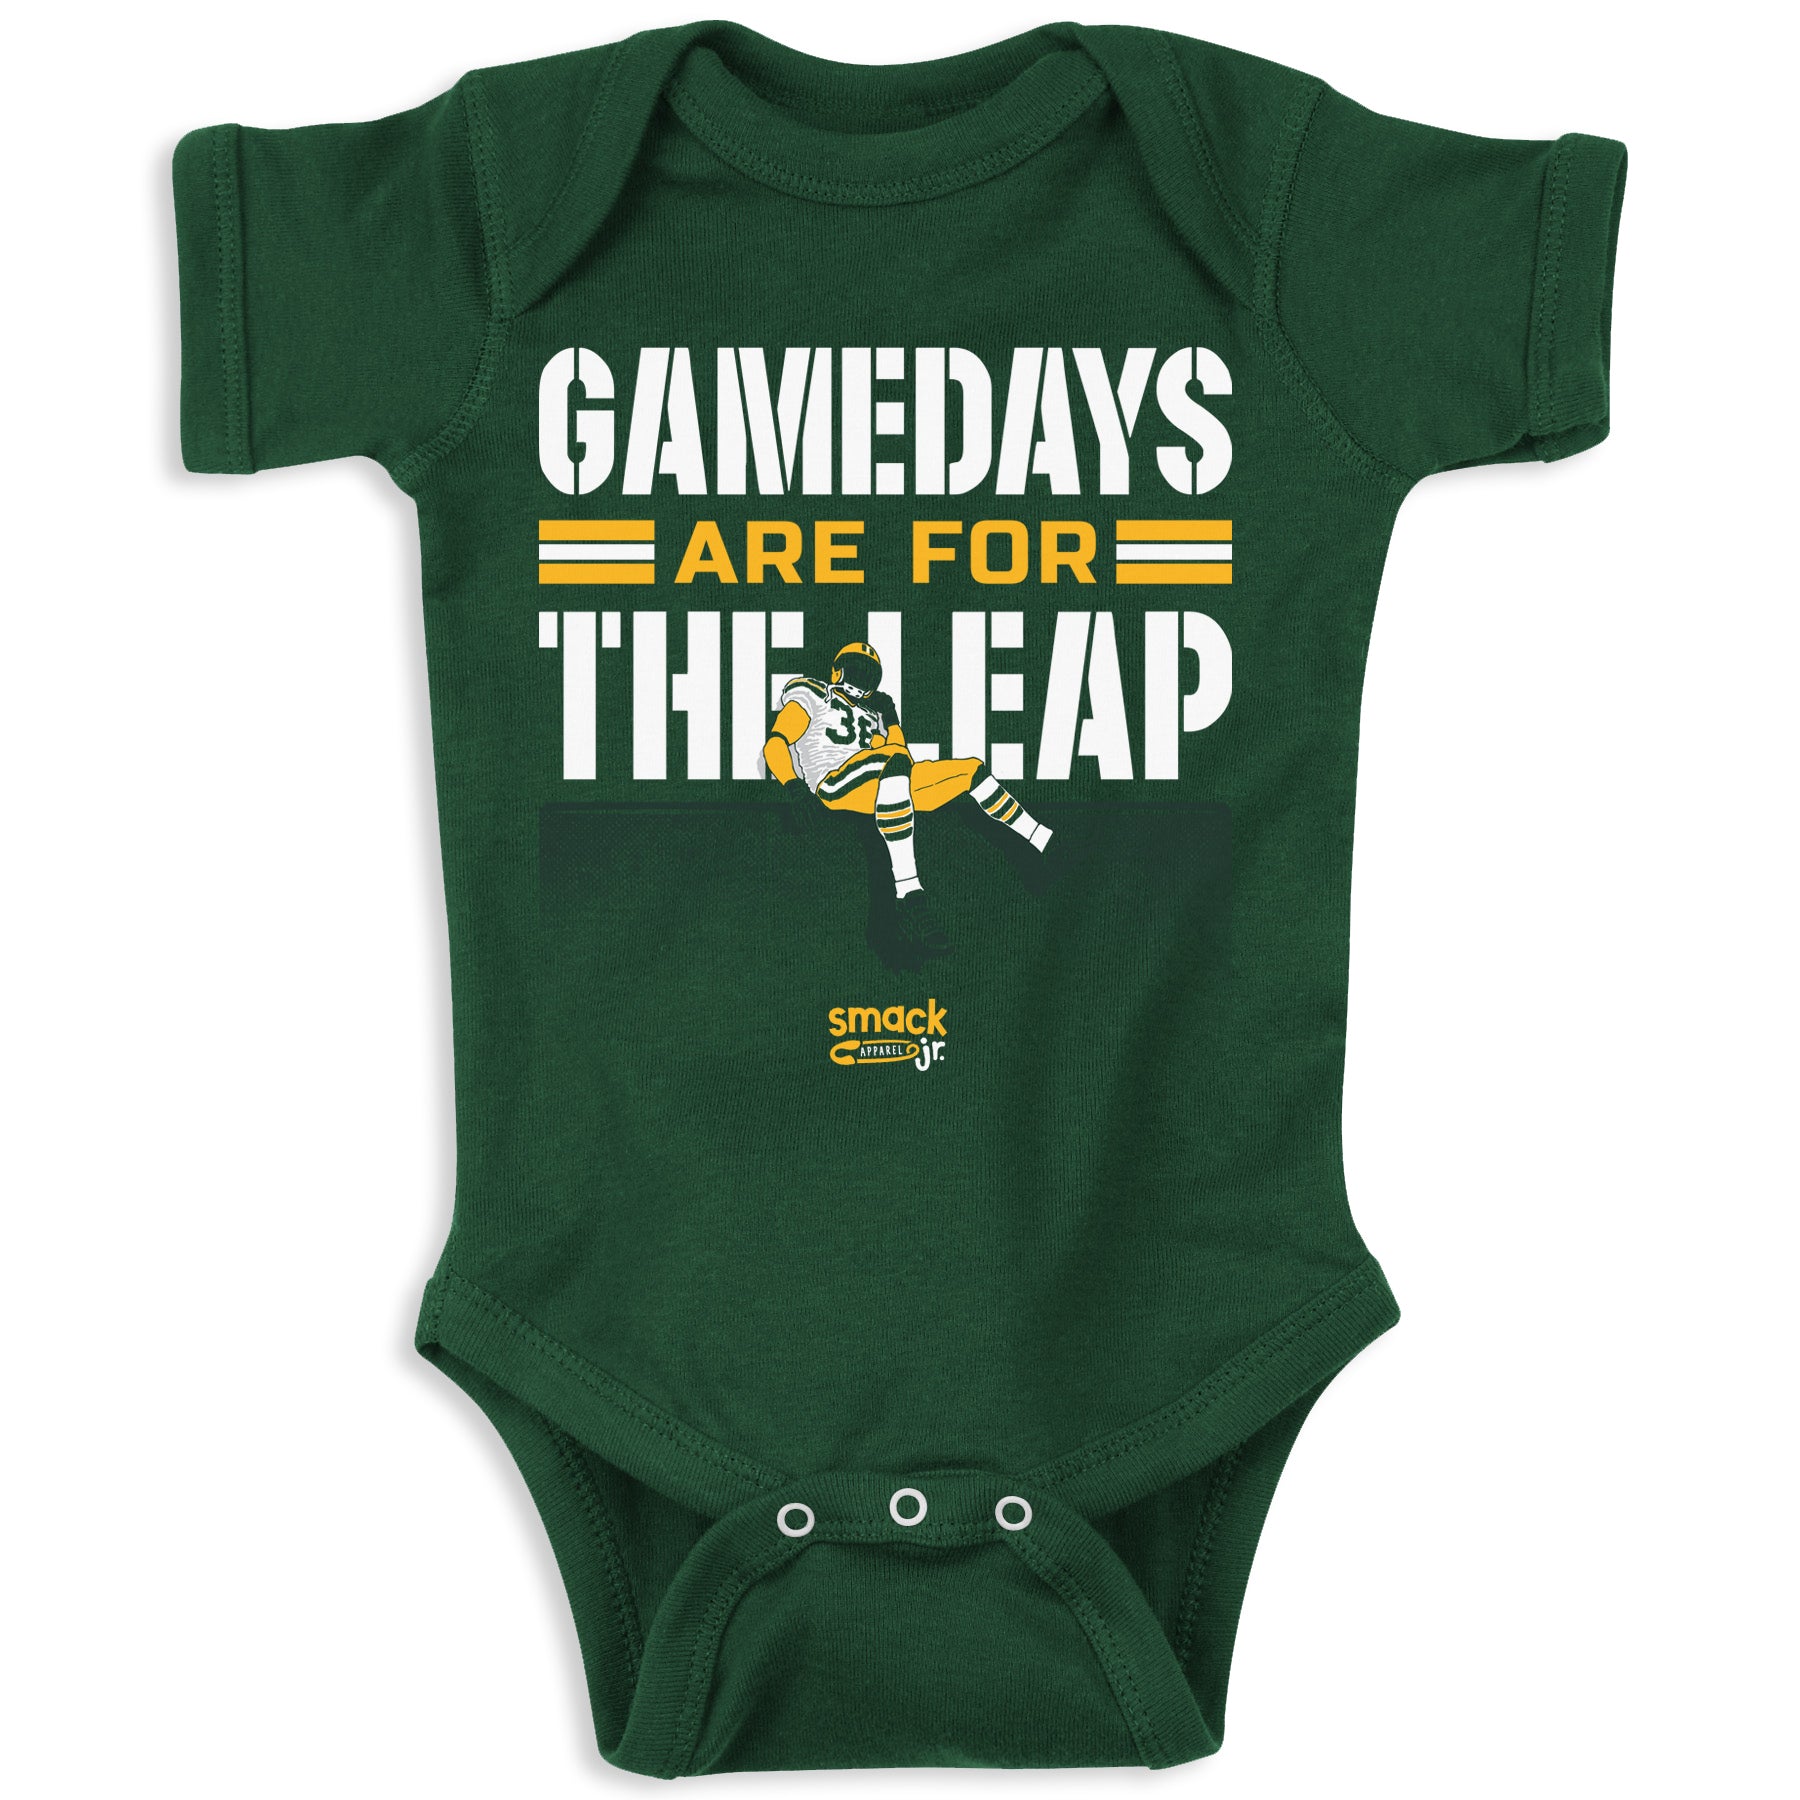 Gamedays Baby Apparel for Green Bay Football Fans (NB-7T)